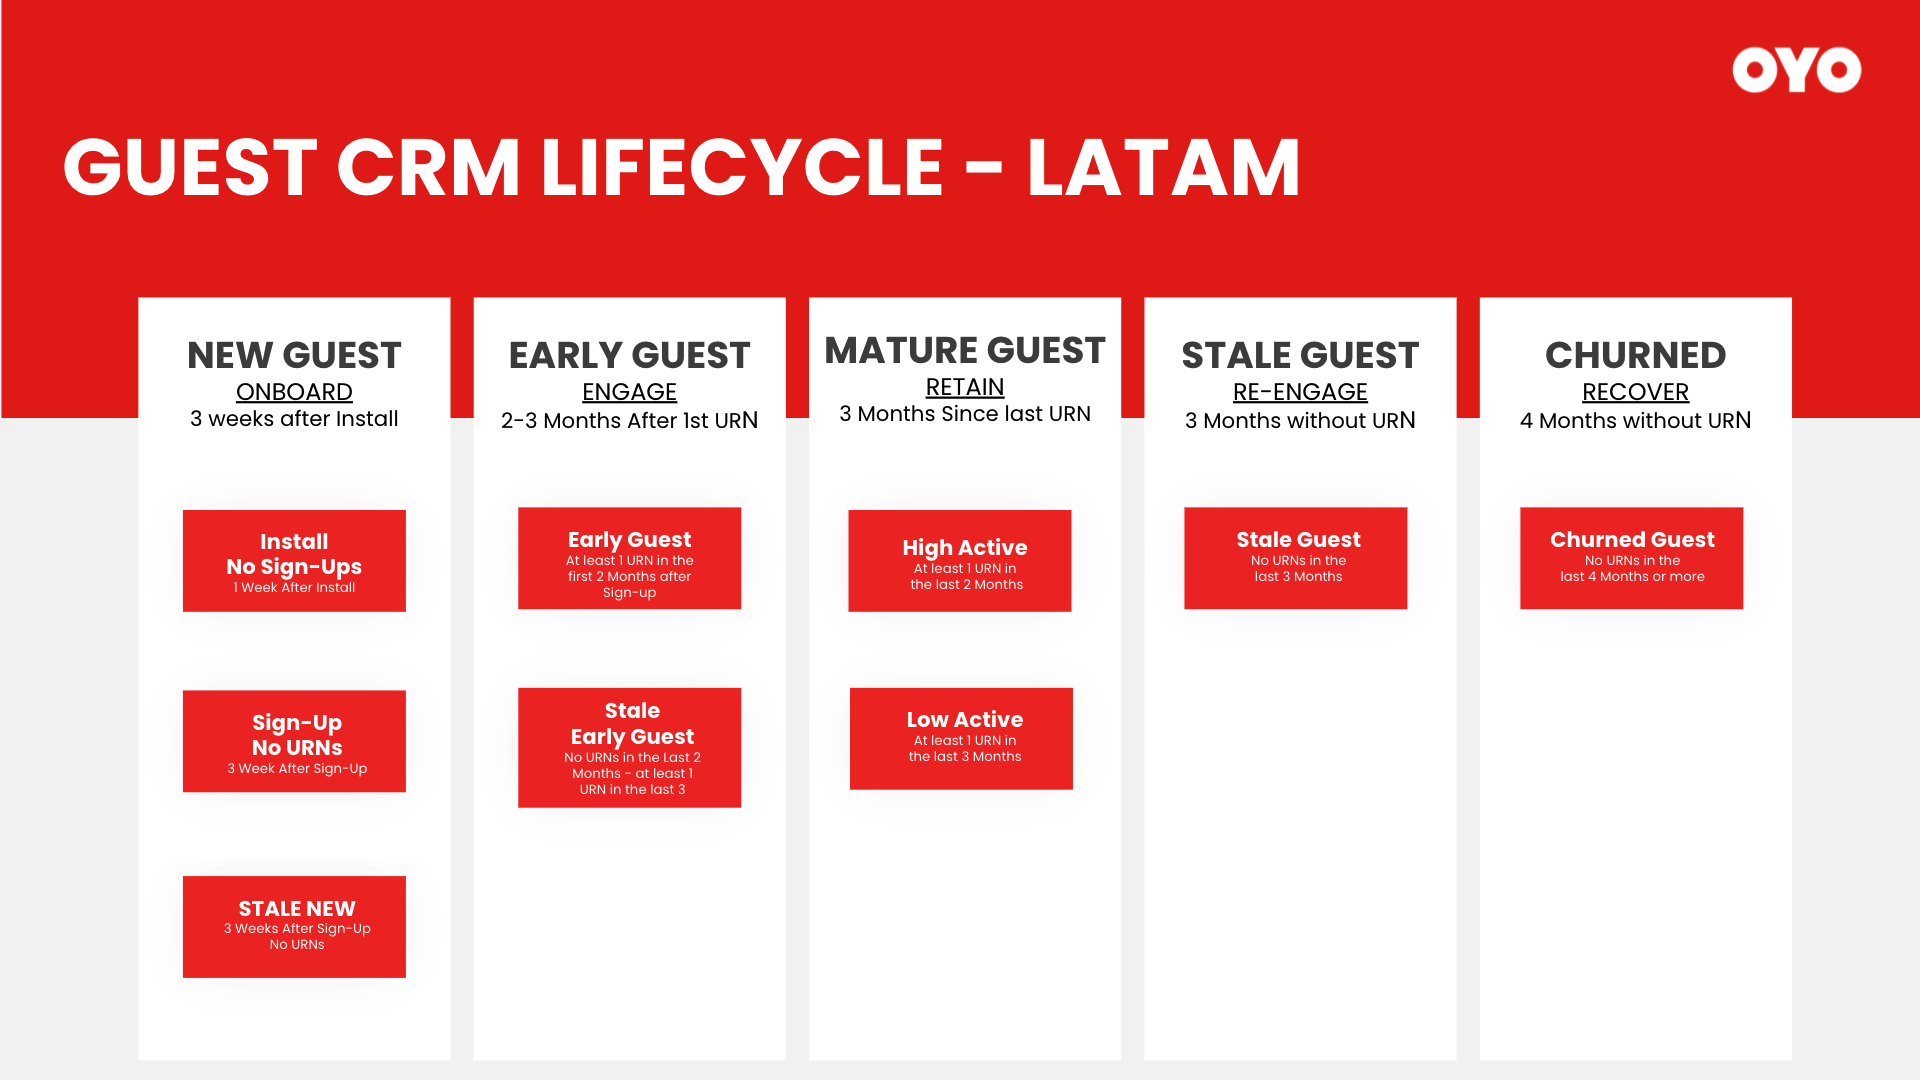 OYO CRM Guest Lifecycle